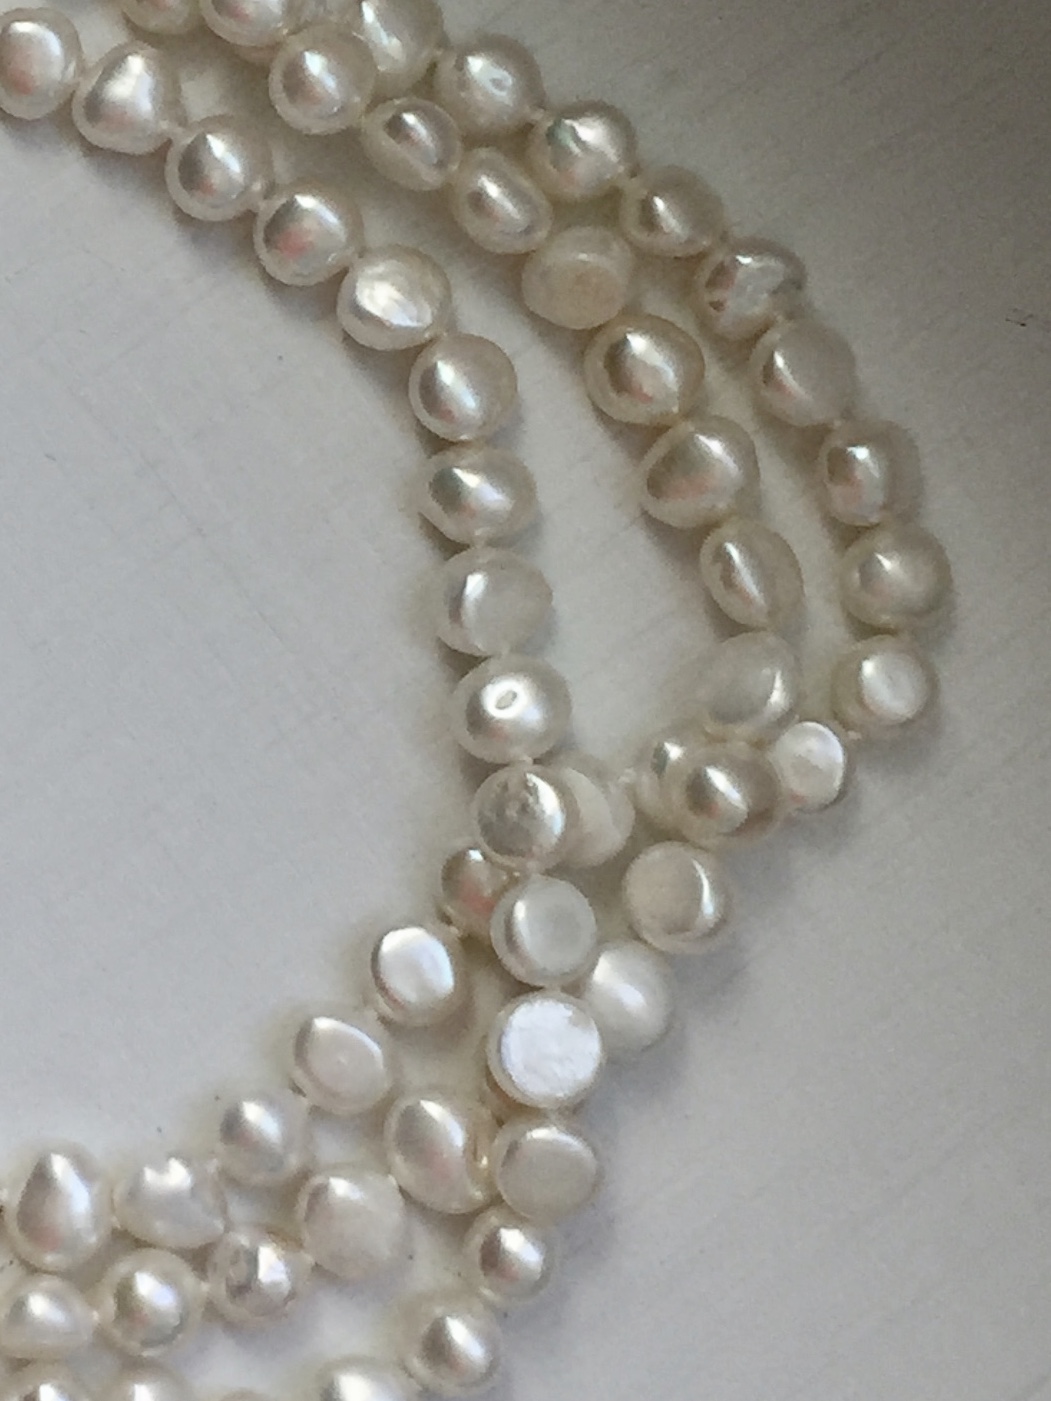 Three Strand Pearl Necklace - The Pearl Girls, Cultured Pearls